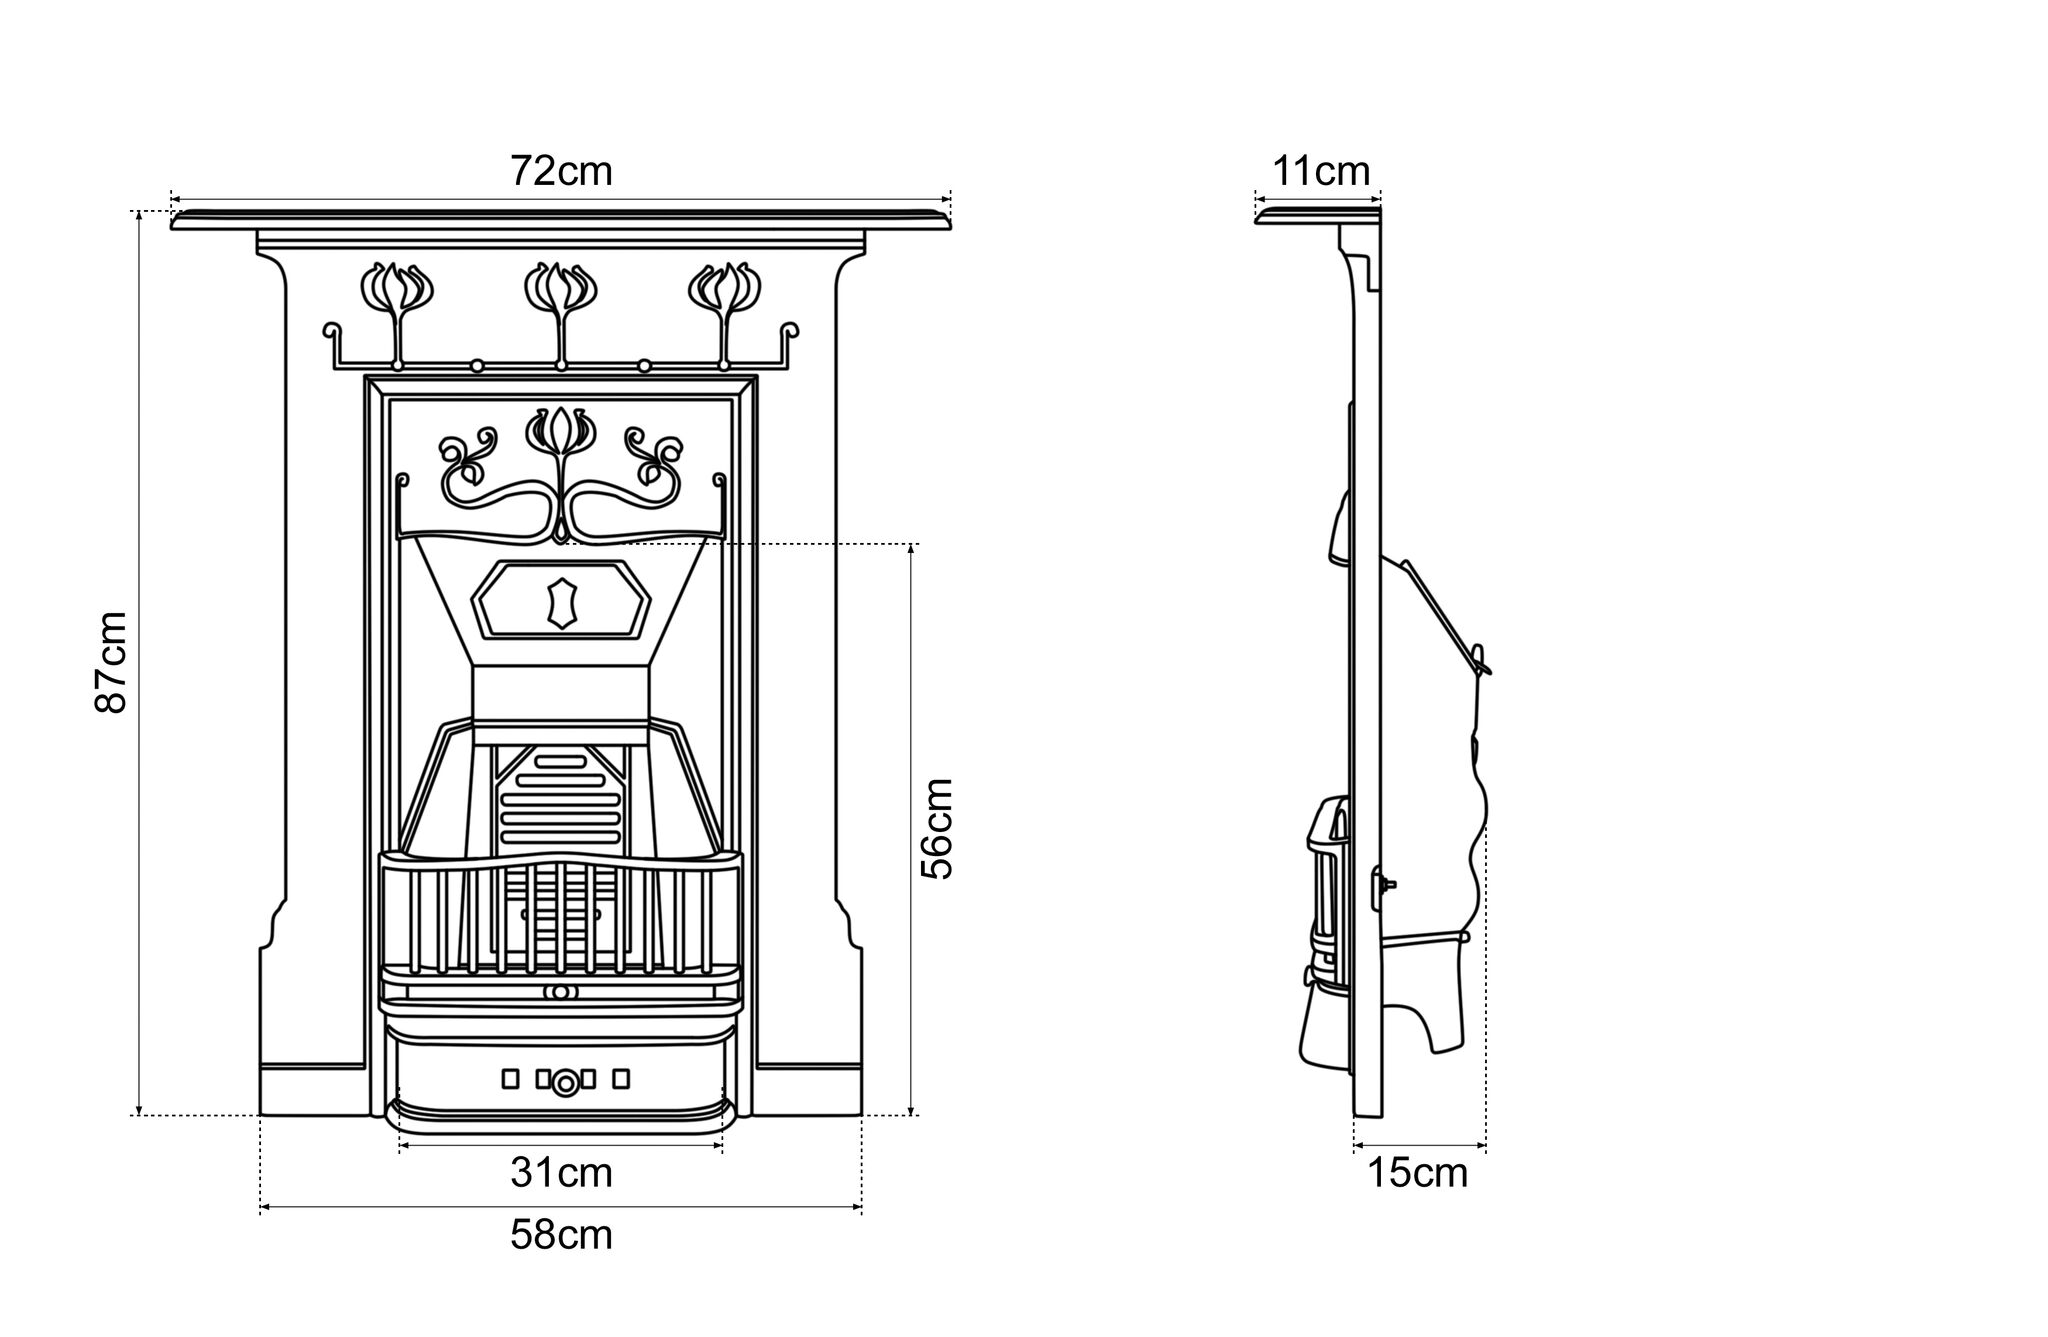 Abbot Cast Iron Combination Fireplace Dimensions.jpg